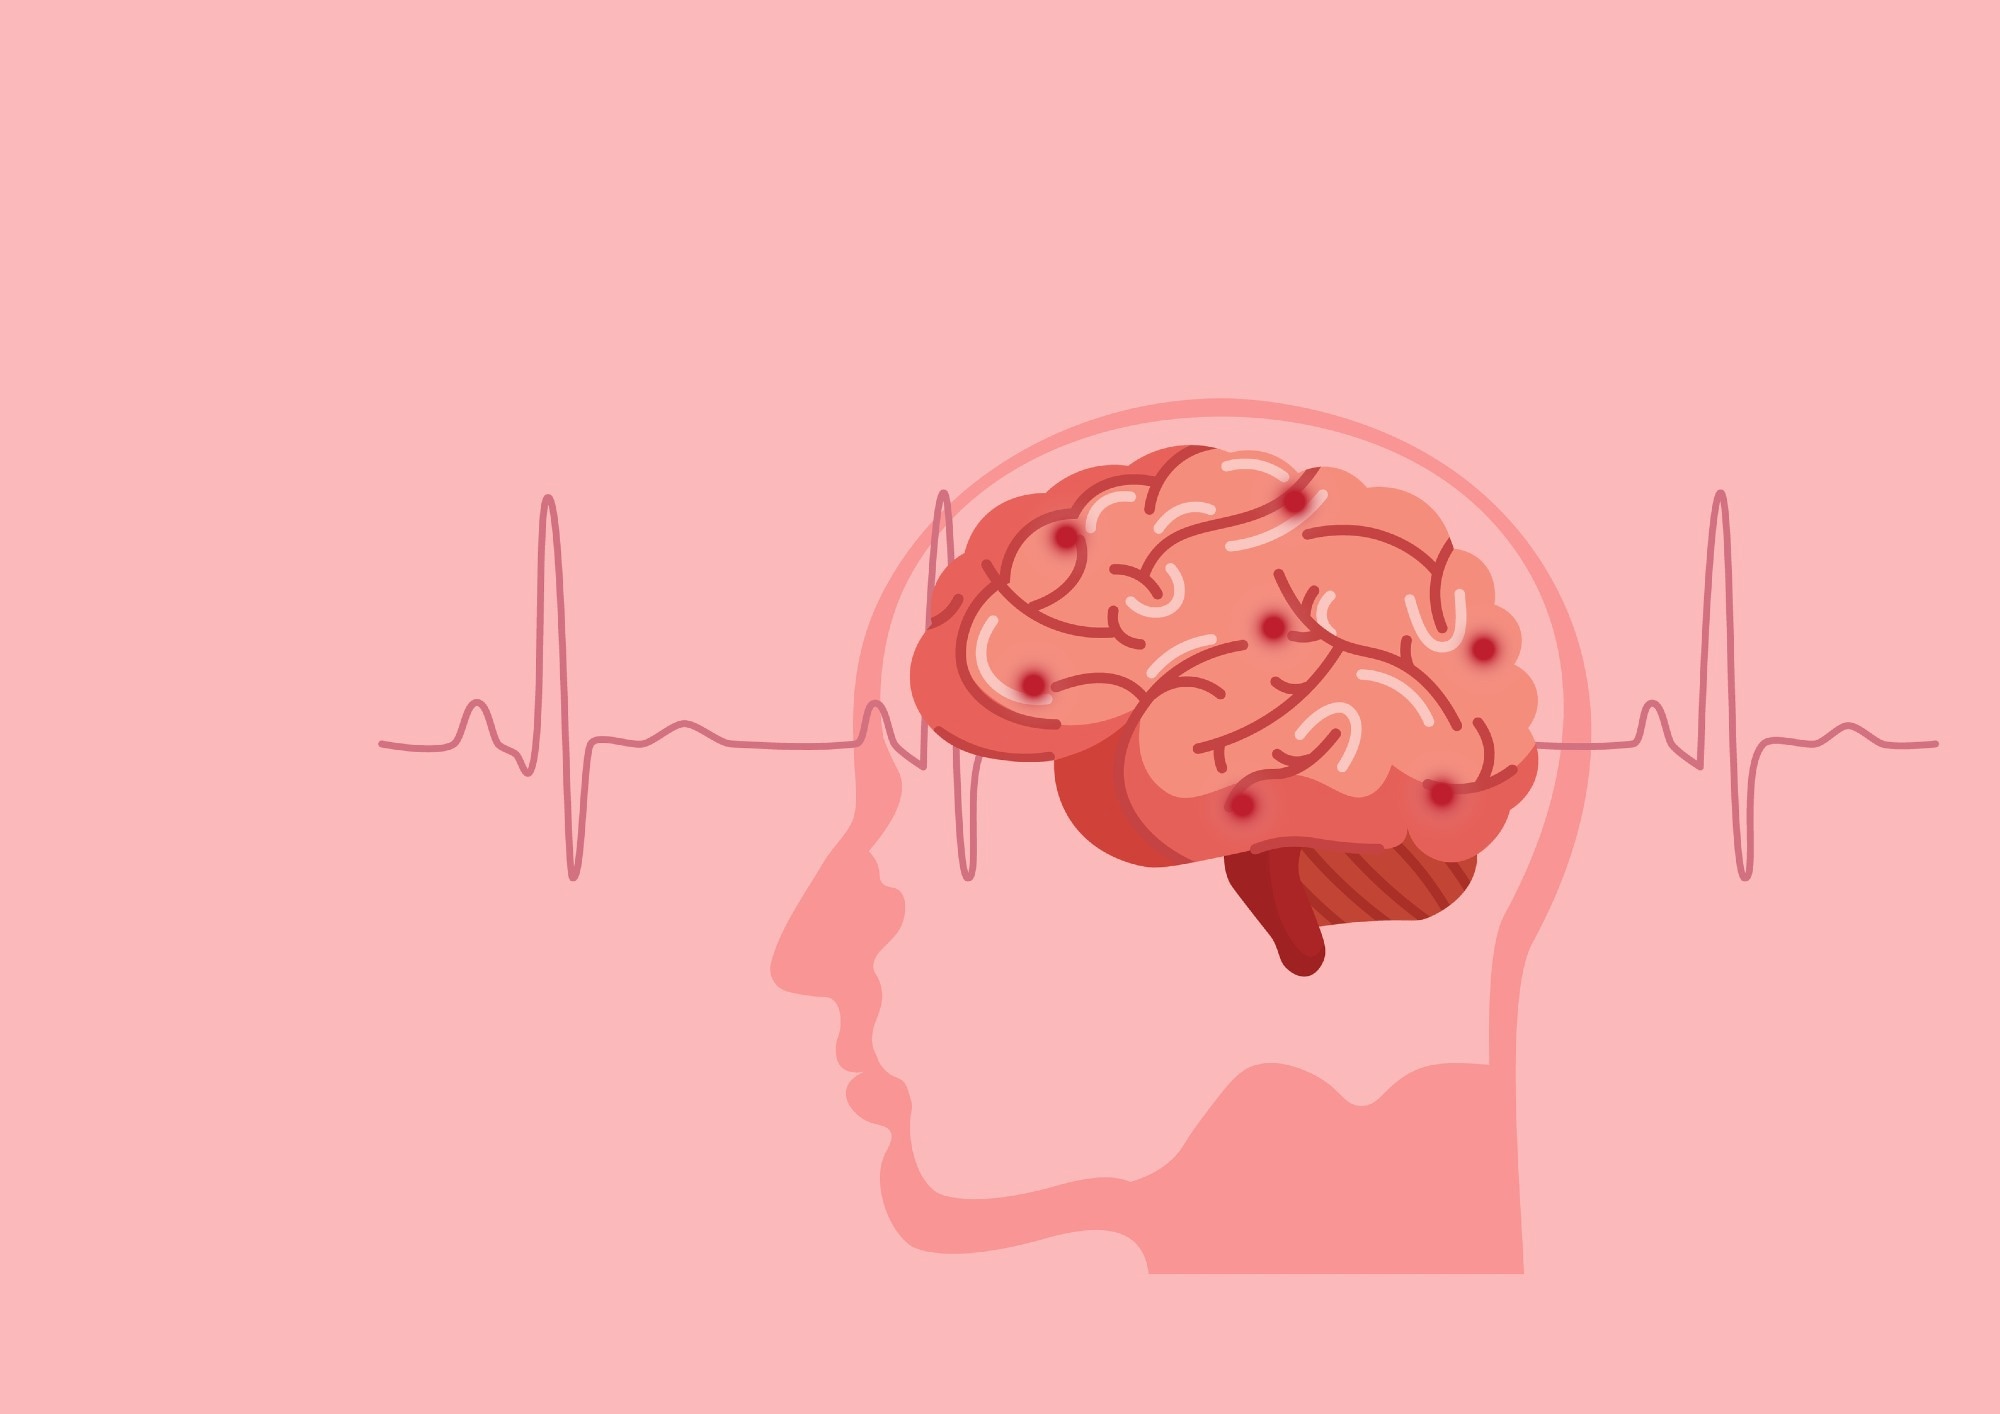 Study: Surge of neurophysiological coupling and connectivity of gamma oscillations in the dying human brain. Image Credit: Piyaphat_Detbun/Shutterstock.com